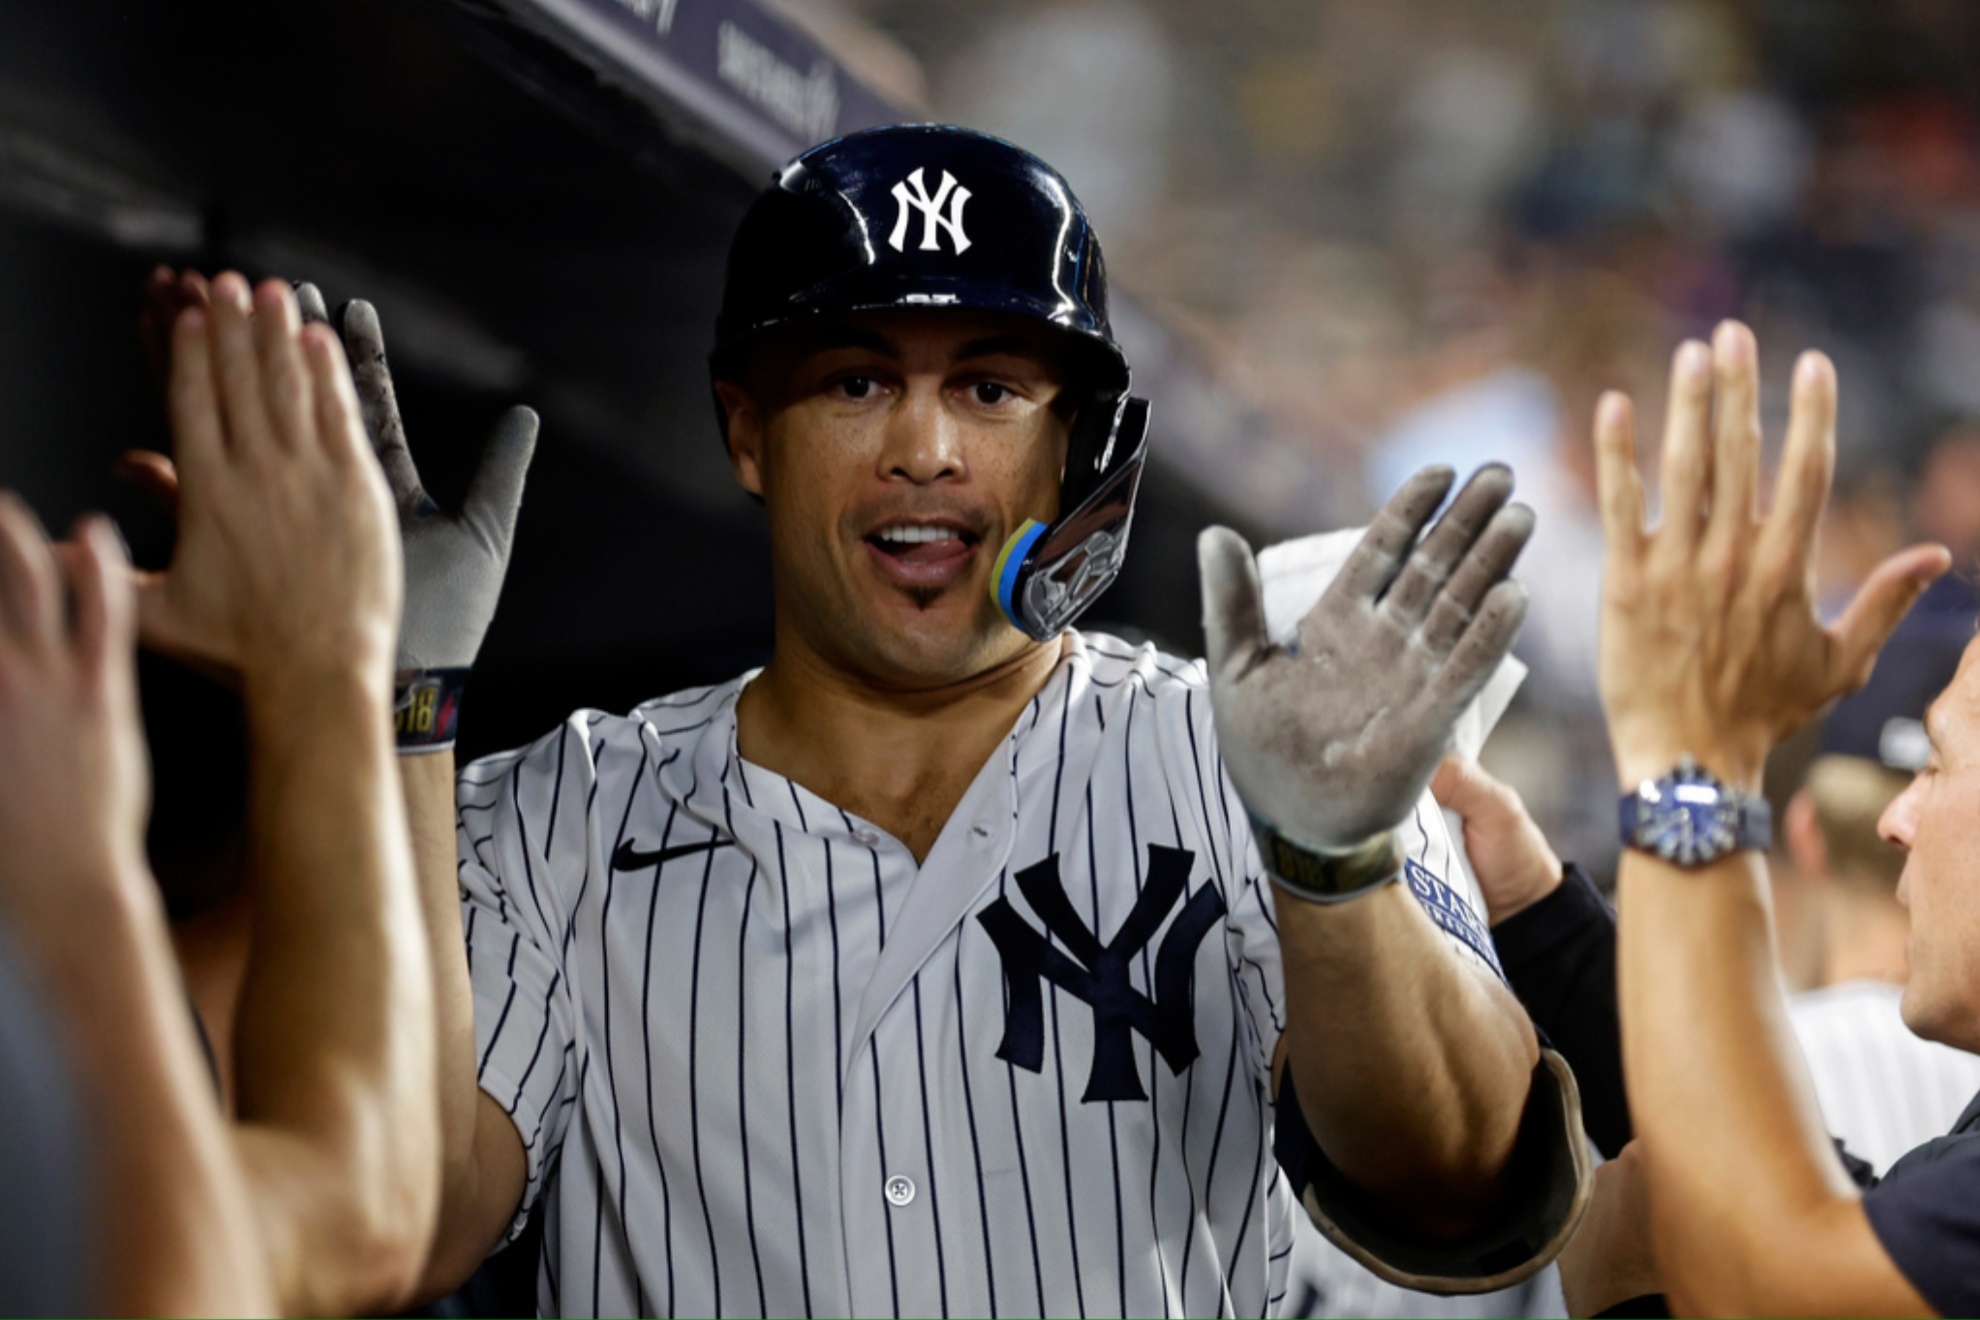 Giancarlo Stanton reached 400 home runs on Tuesday against the Tiger